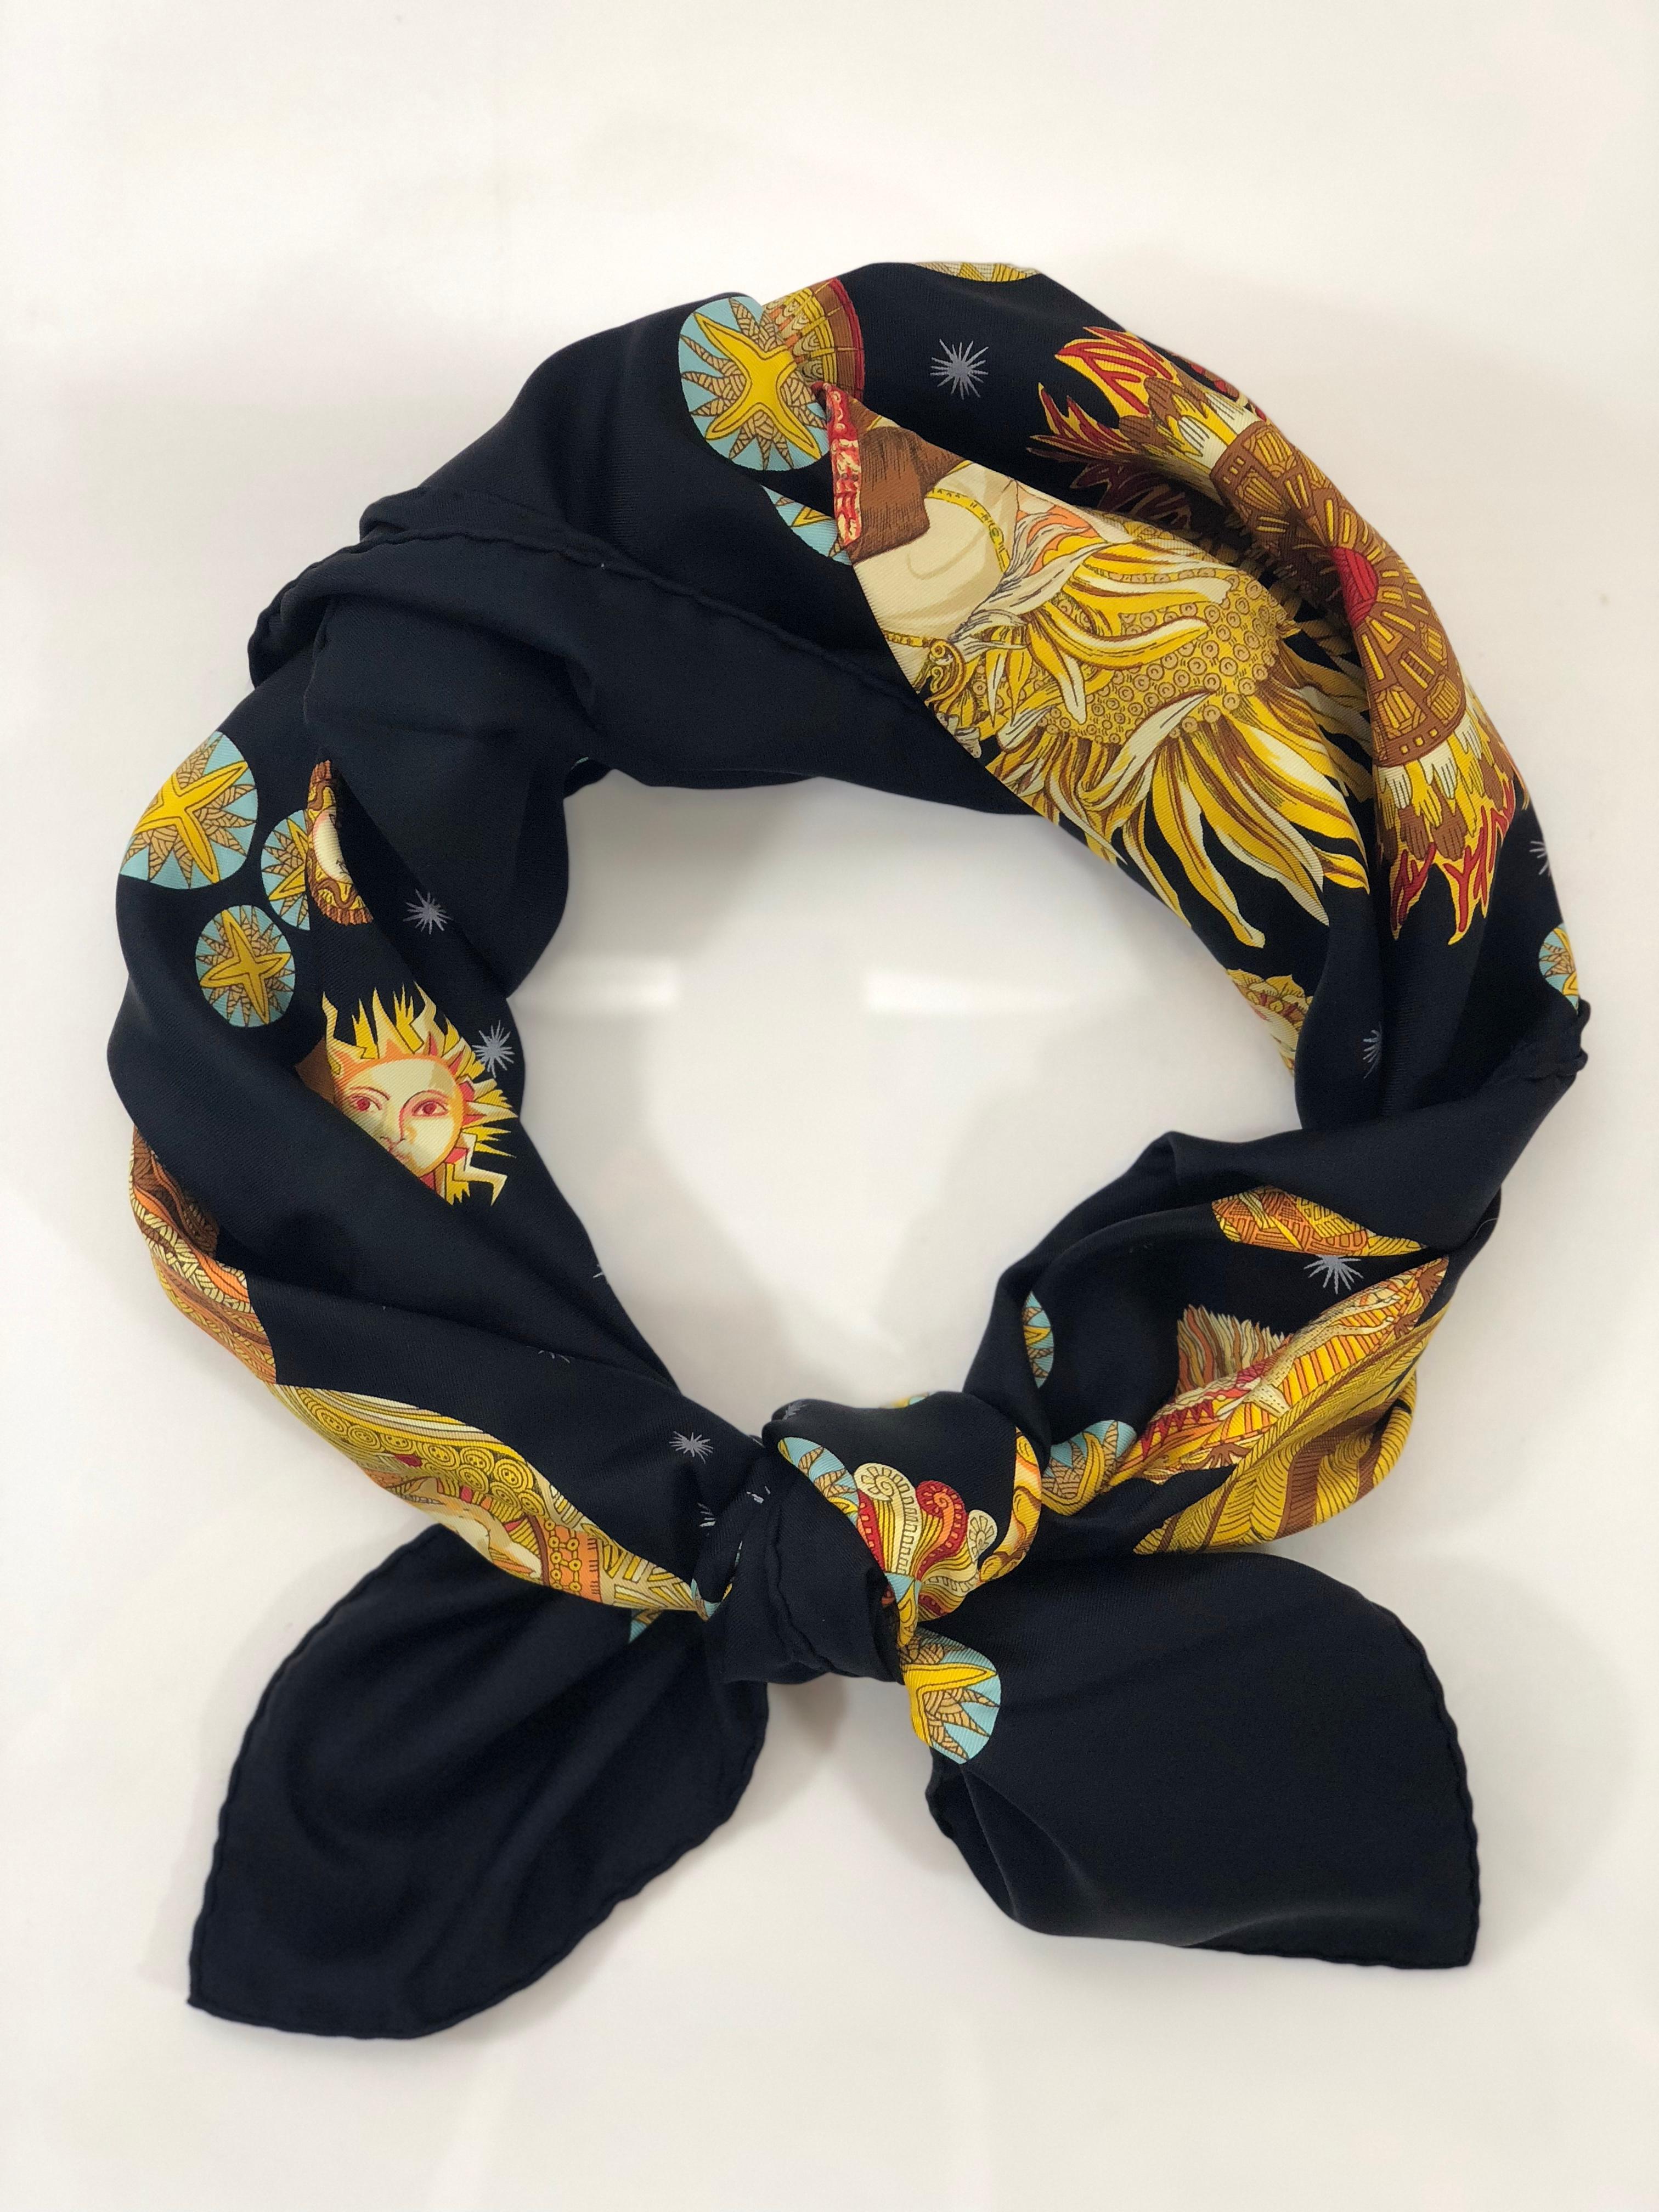 MODEL - Hermes Scarf Le Roy Soleil Silk in Black

CONDITION - Exceptional! No visible signs of wear.

SKU - 2771

DATE/SERIAL CODE - NA

ORIGIN - France

PRODUCTION - NA

DIMENSIONS - L35 x H35 x D.05

STRAP/HANDLE DROP - NA

MATERIAL - 100%